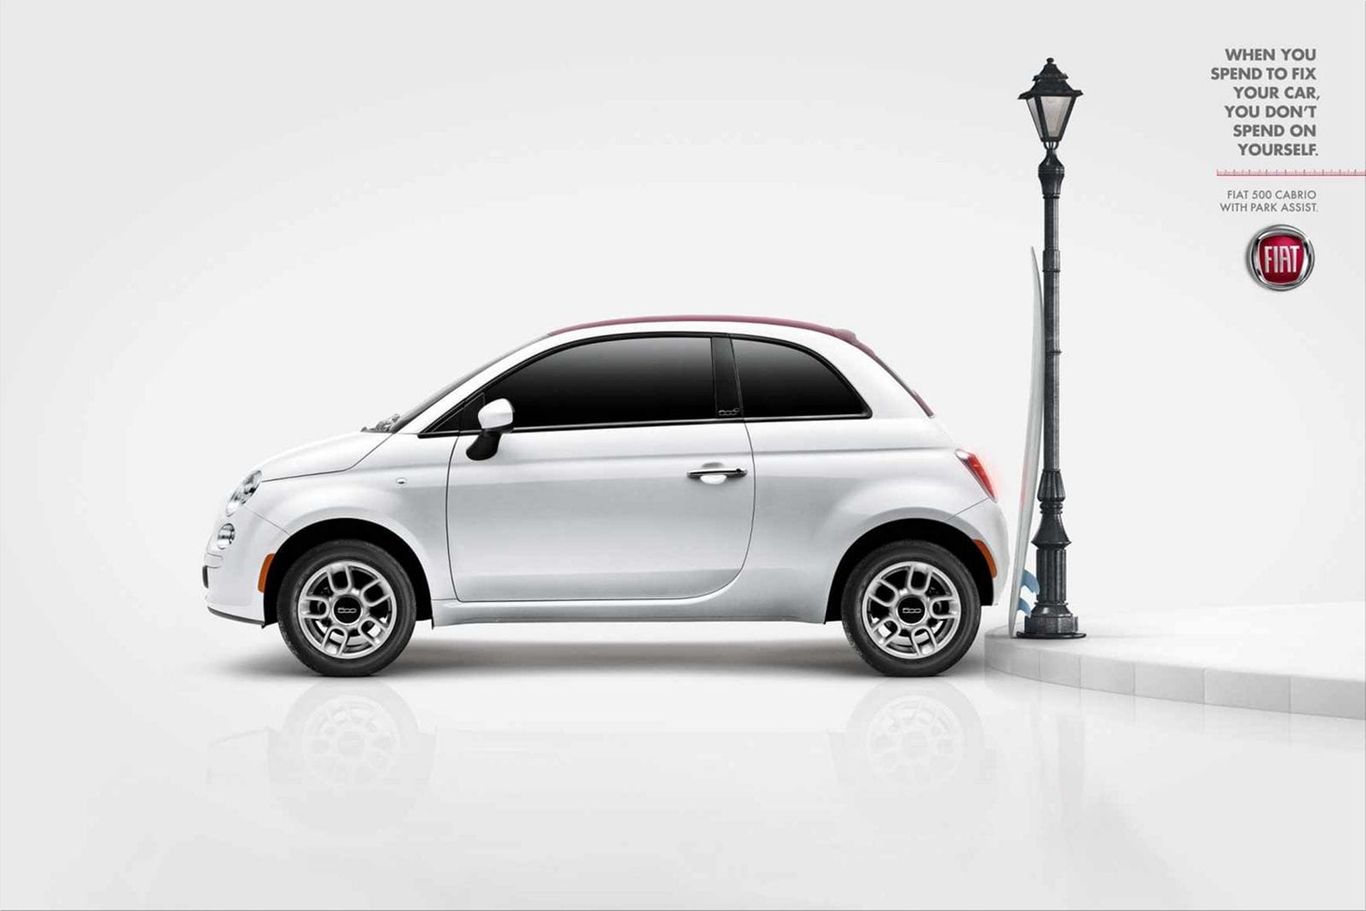 Fiat 500: When you spend to fix your car, you don't spend on yourself. | ad  Ruby